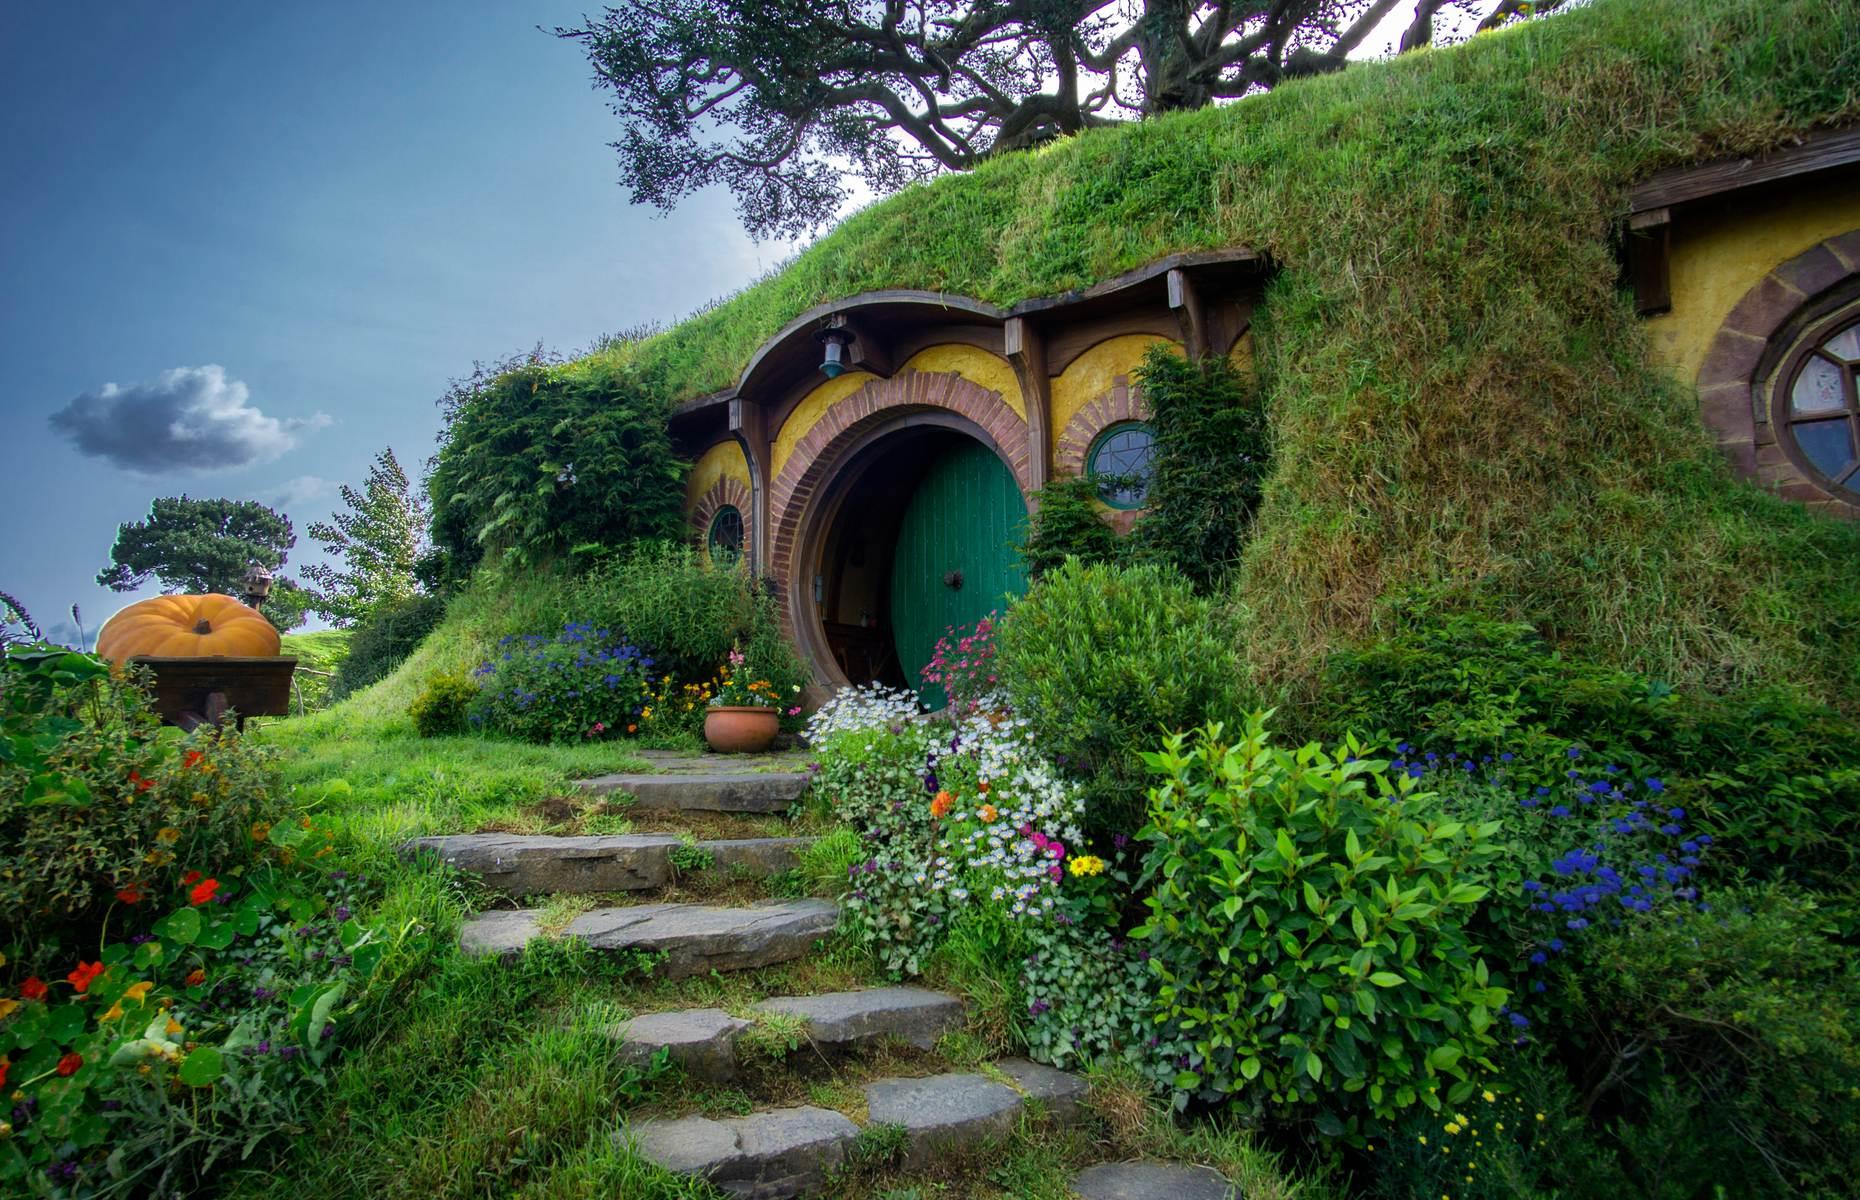 <p>It might not be a real settlement but Hobbiton certainly packs in the fairy-tale charm. The movie set used in the <em>Lord of the Rings</em> and <em>The Hobbit</em> movies, located in New Zealand’s Waikato region, is set on a sheep farm and includes cute grass-covered  “hobbit holes”. Located in picturesque farmland, Hobbiton, or “the Shire” as it’s sometimes called, gives a glimpse into the fantasy world of the iconic films. </p>